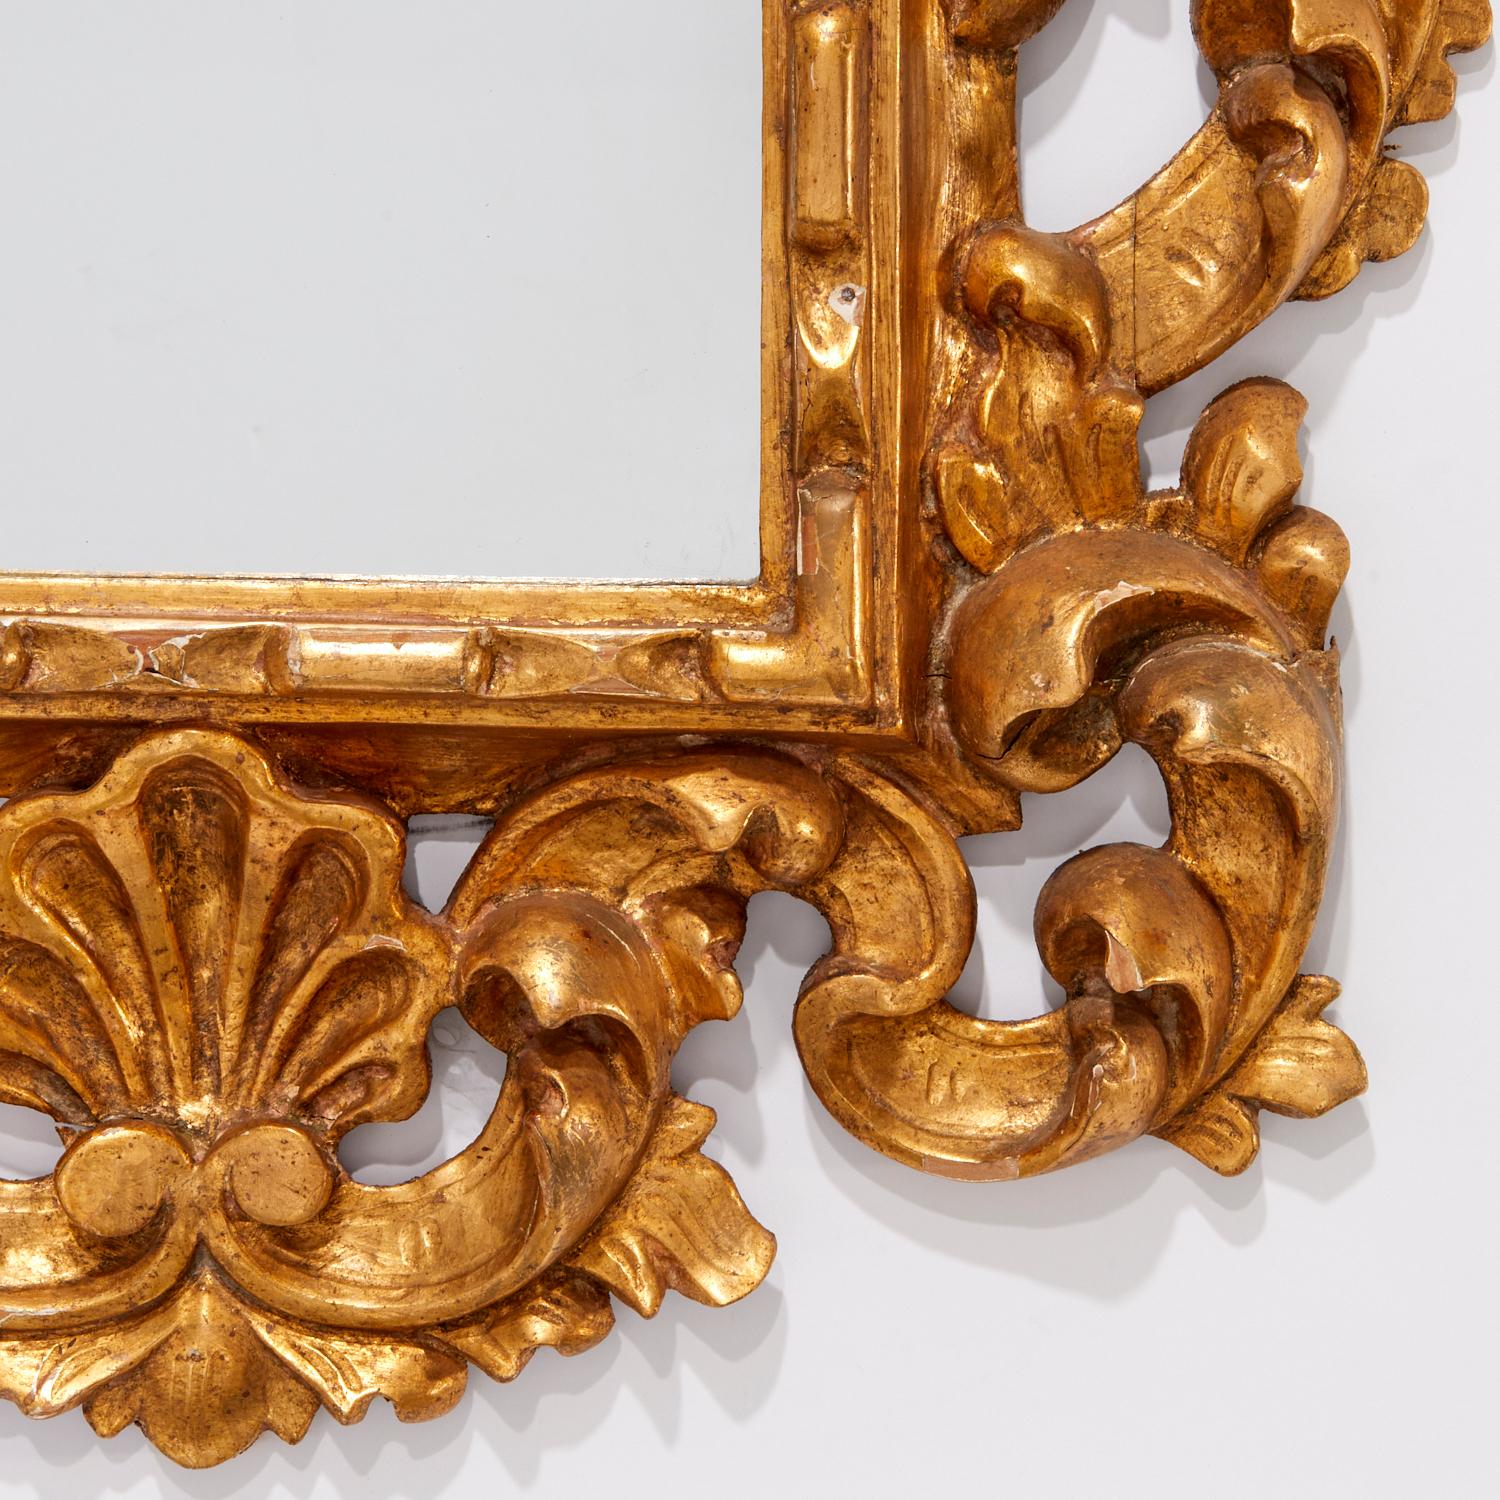 20th c. Spanish Baroque Style Giltwood Mirror With Scrollwork Frame  In Good Condition For Sale In Morristown, NJ